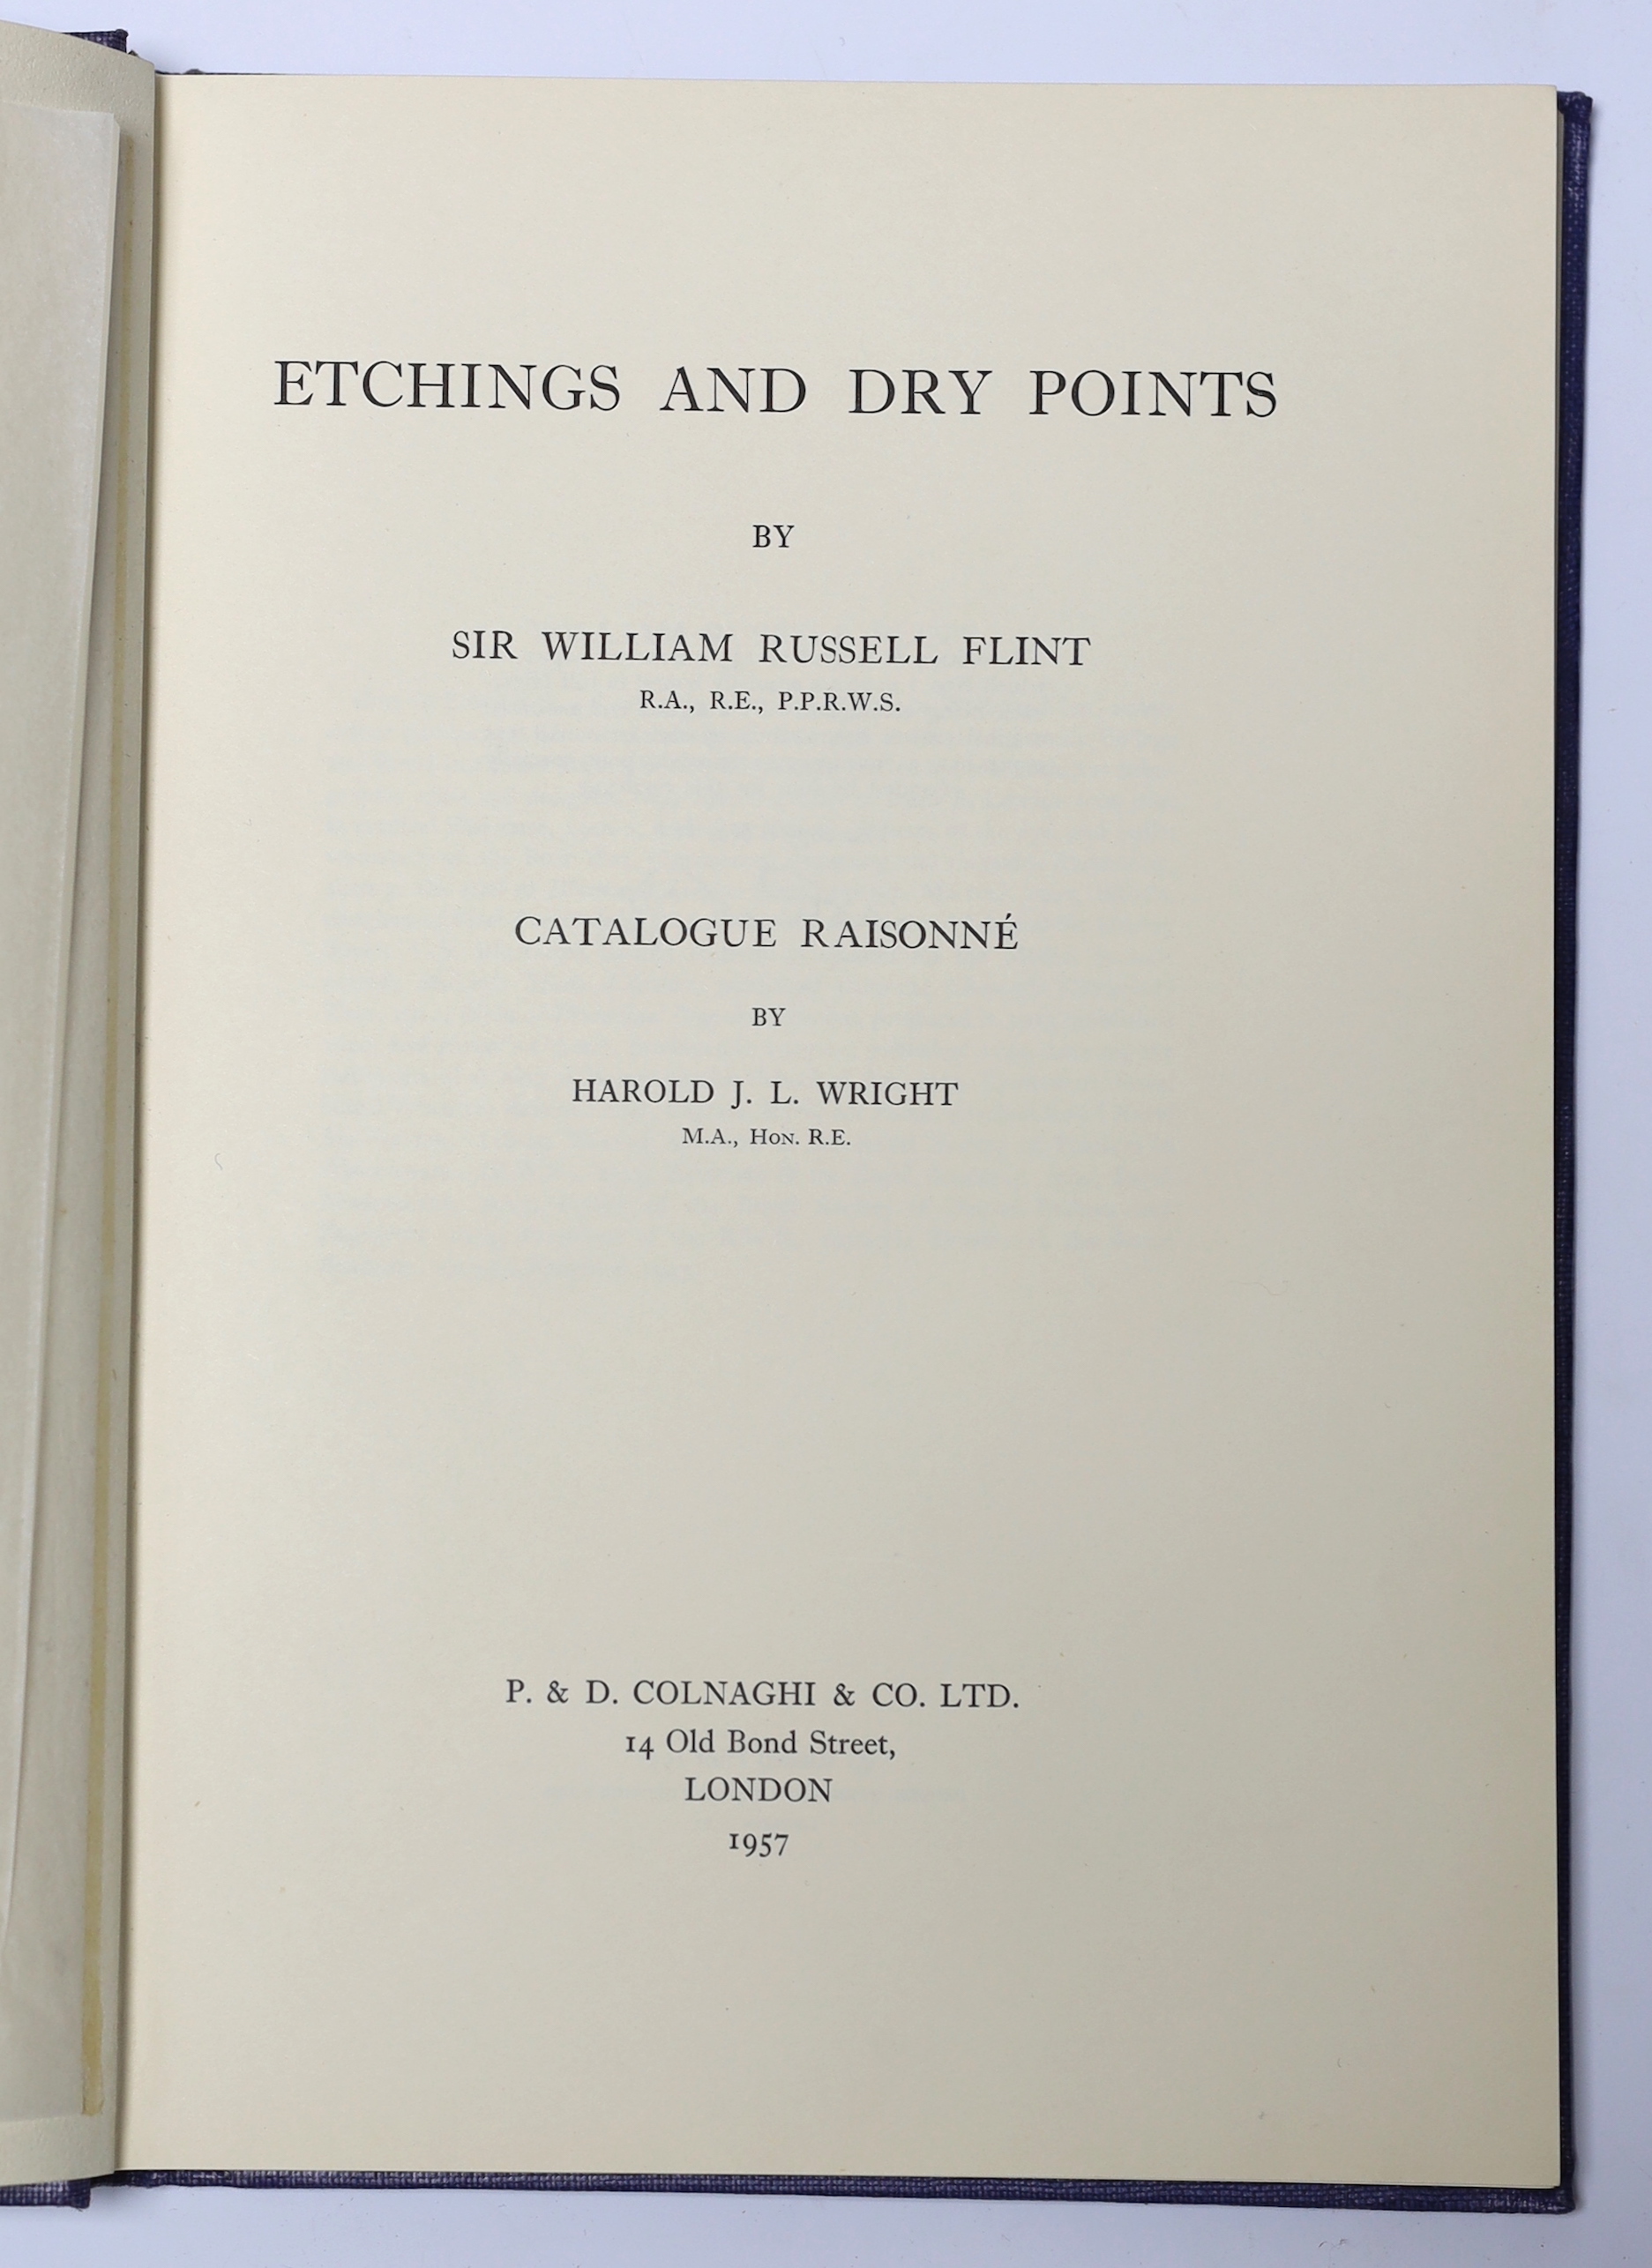 Wright, Harold J.L. - Flint, Sir William Russell -,Etchings and Drypoints: A Catalogue Raisonne, one of 135, signed by the artist, with a dry-point etching frontispiece also signed by the artist, 4to, two tone blue cloth